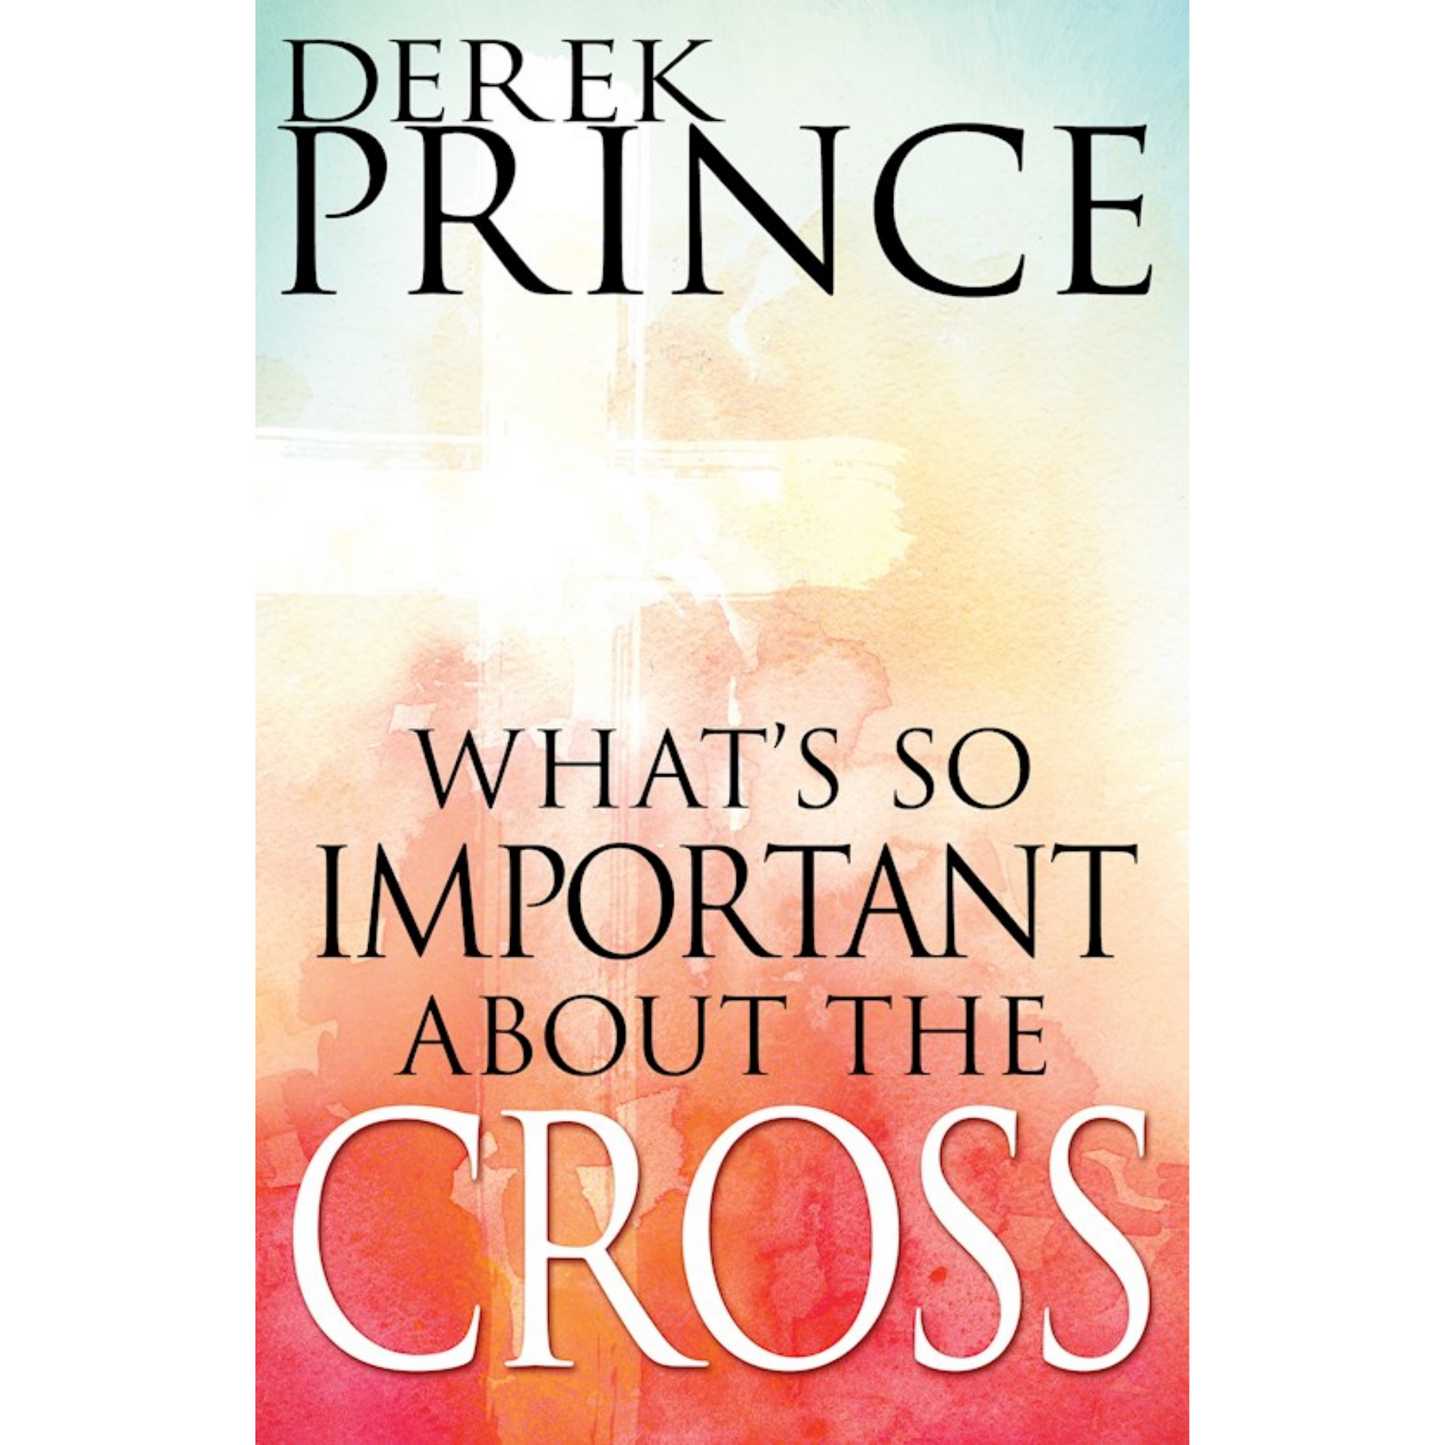 What's So Important About the Cross?